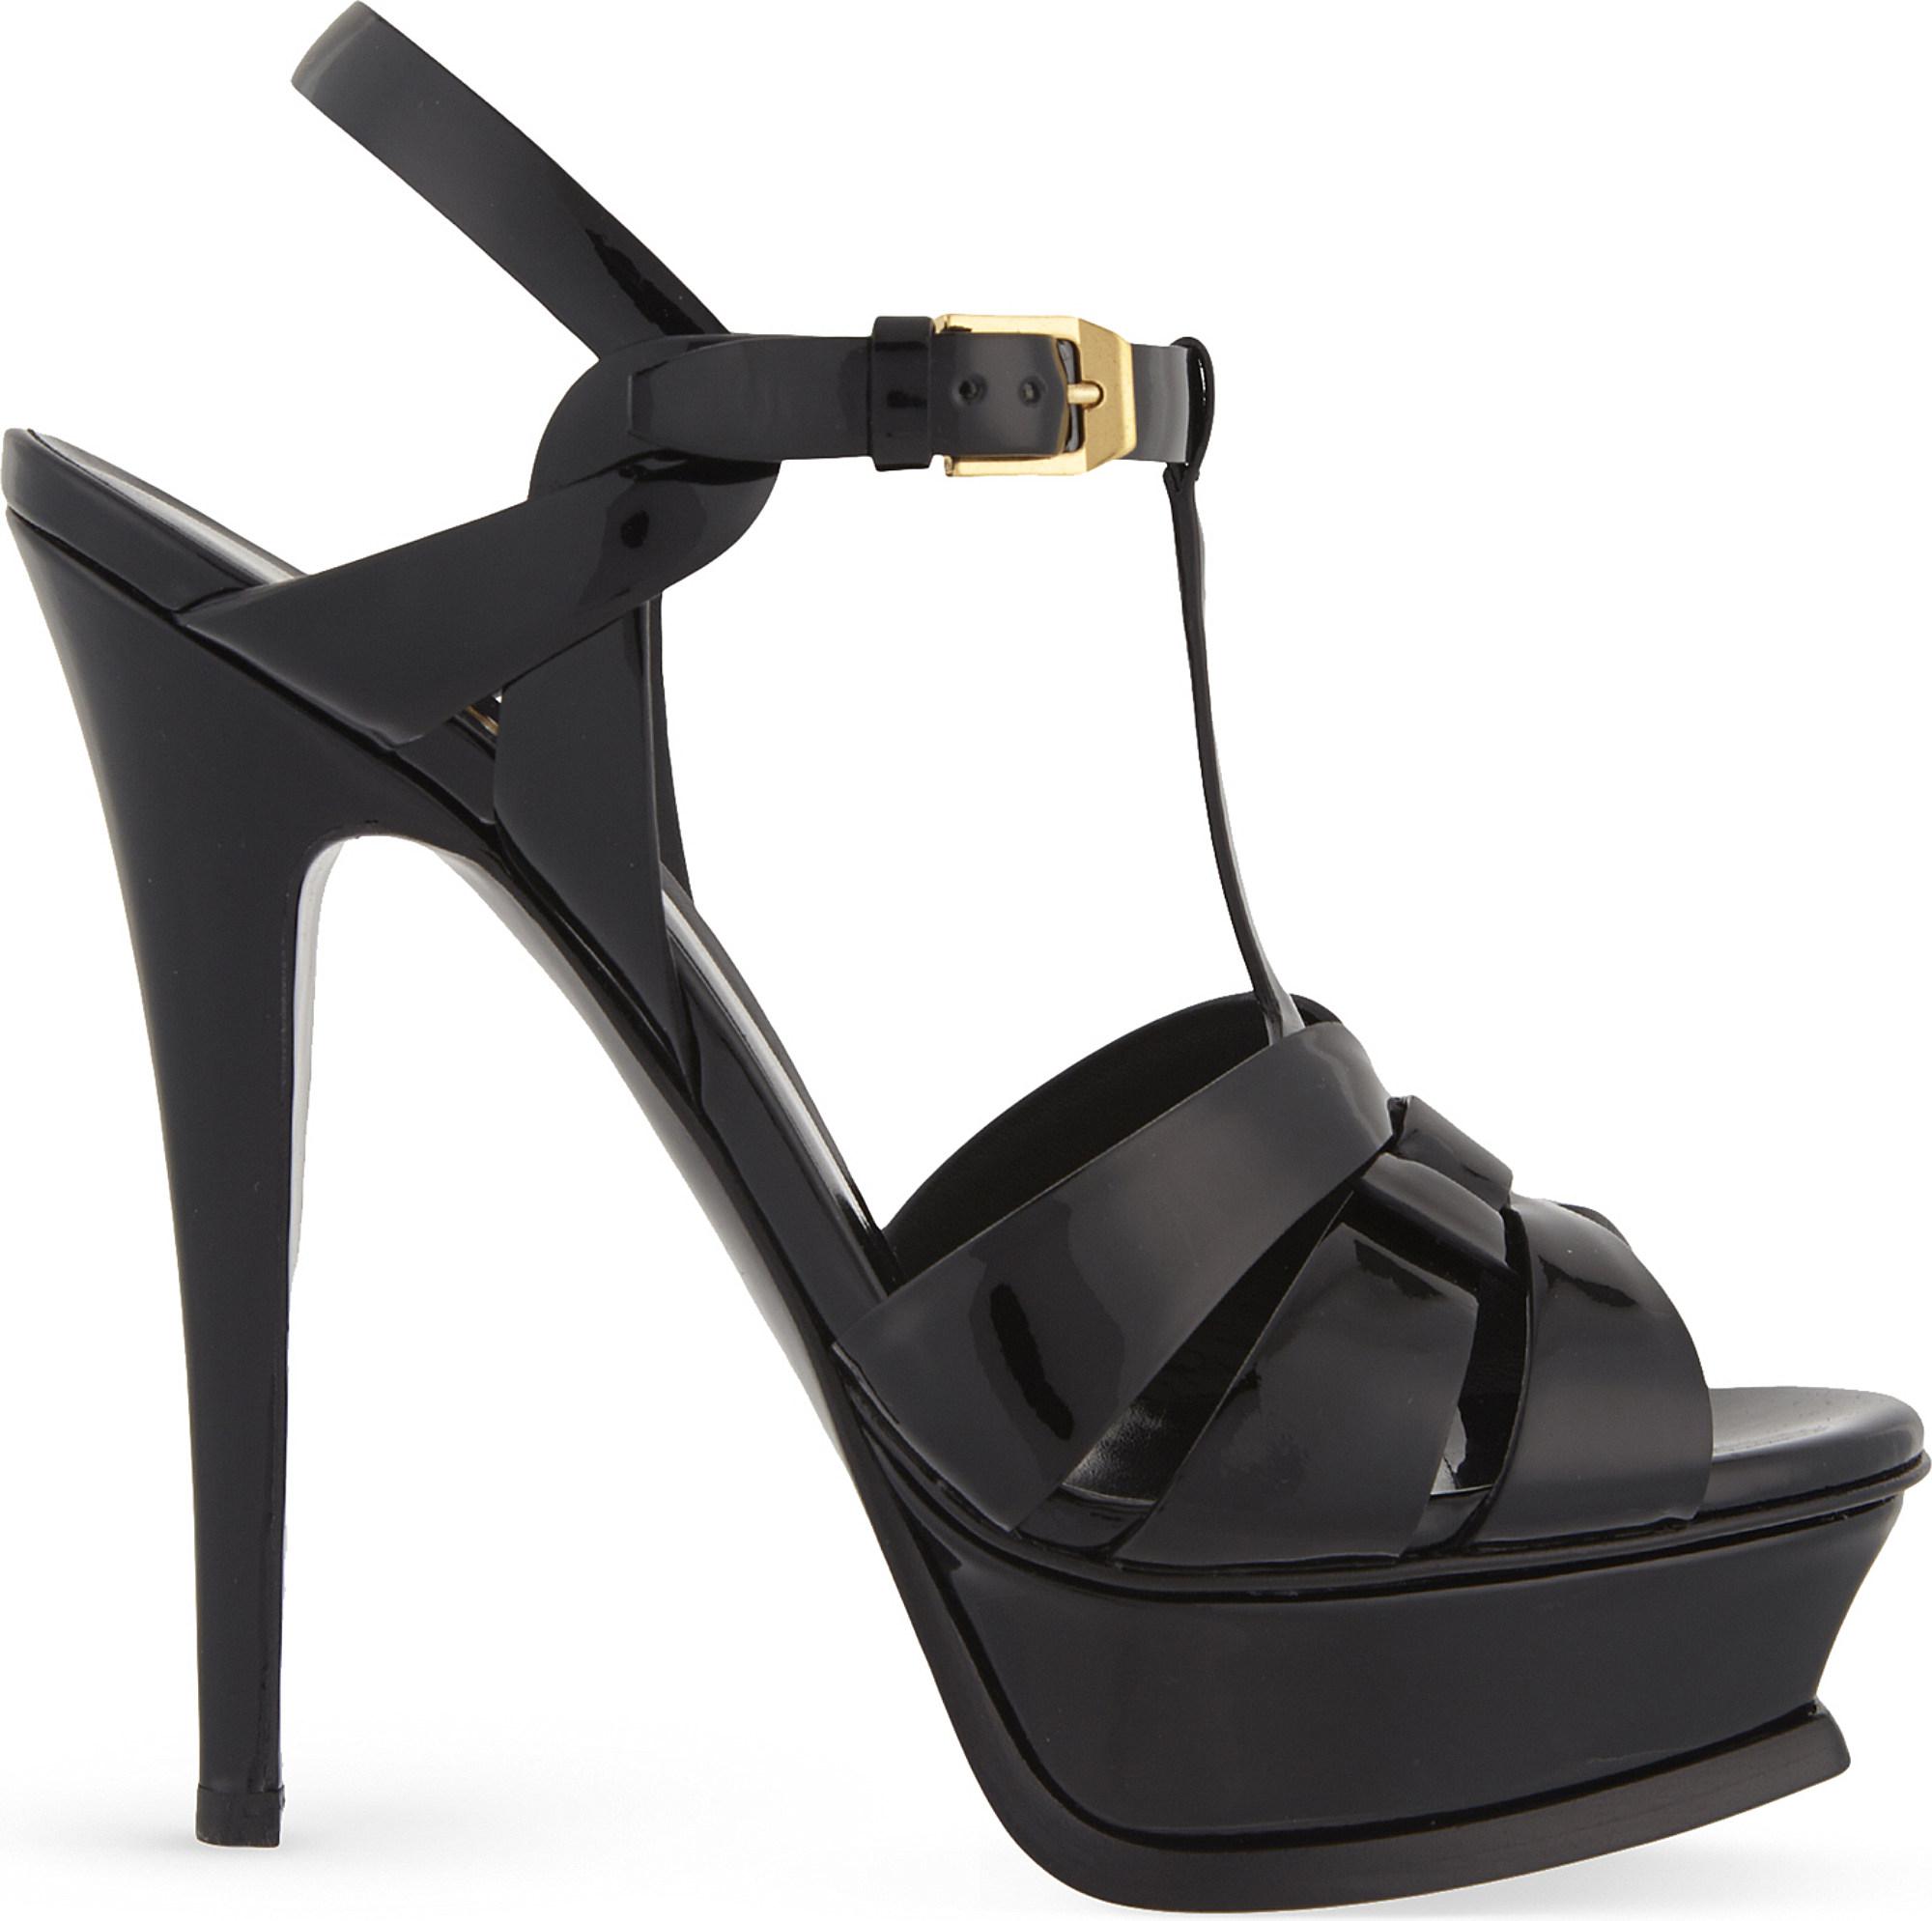 Lyst - Saint Laurent Tribute 105 Patent-leather Heeled Sandals in Black ...